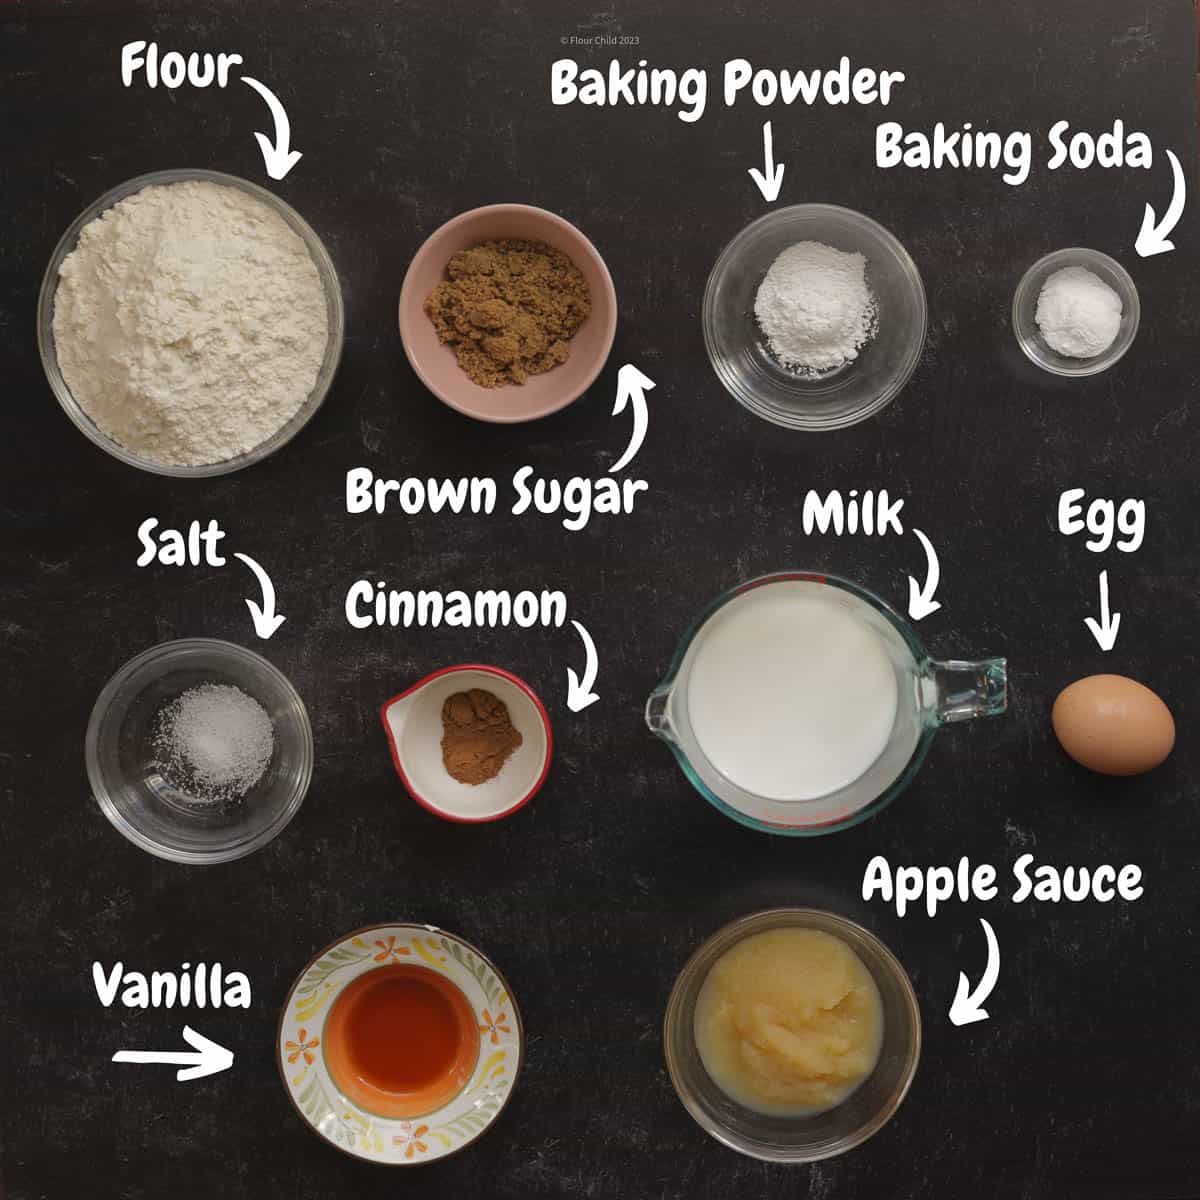 All the ingredients for cinnamon apple pancakes on a black background.